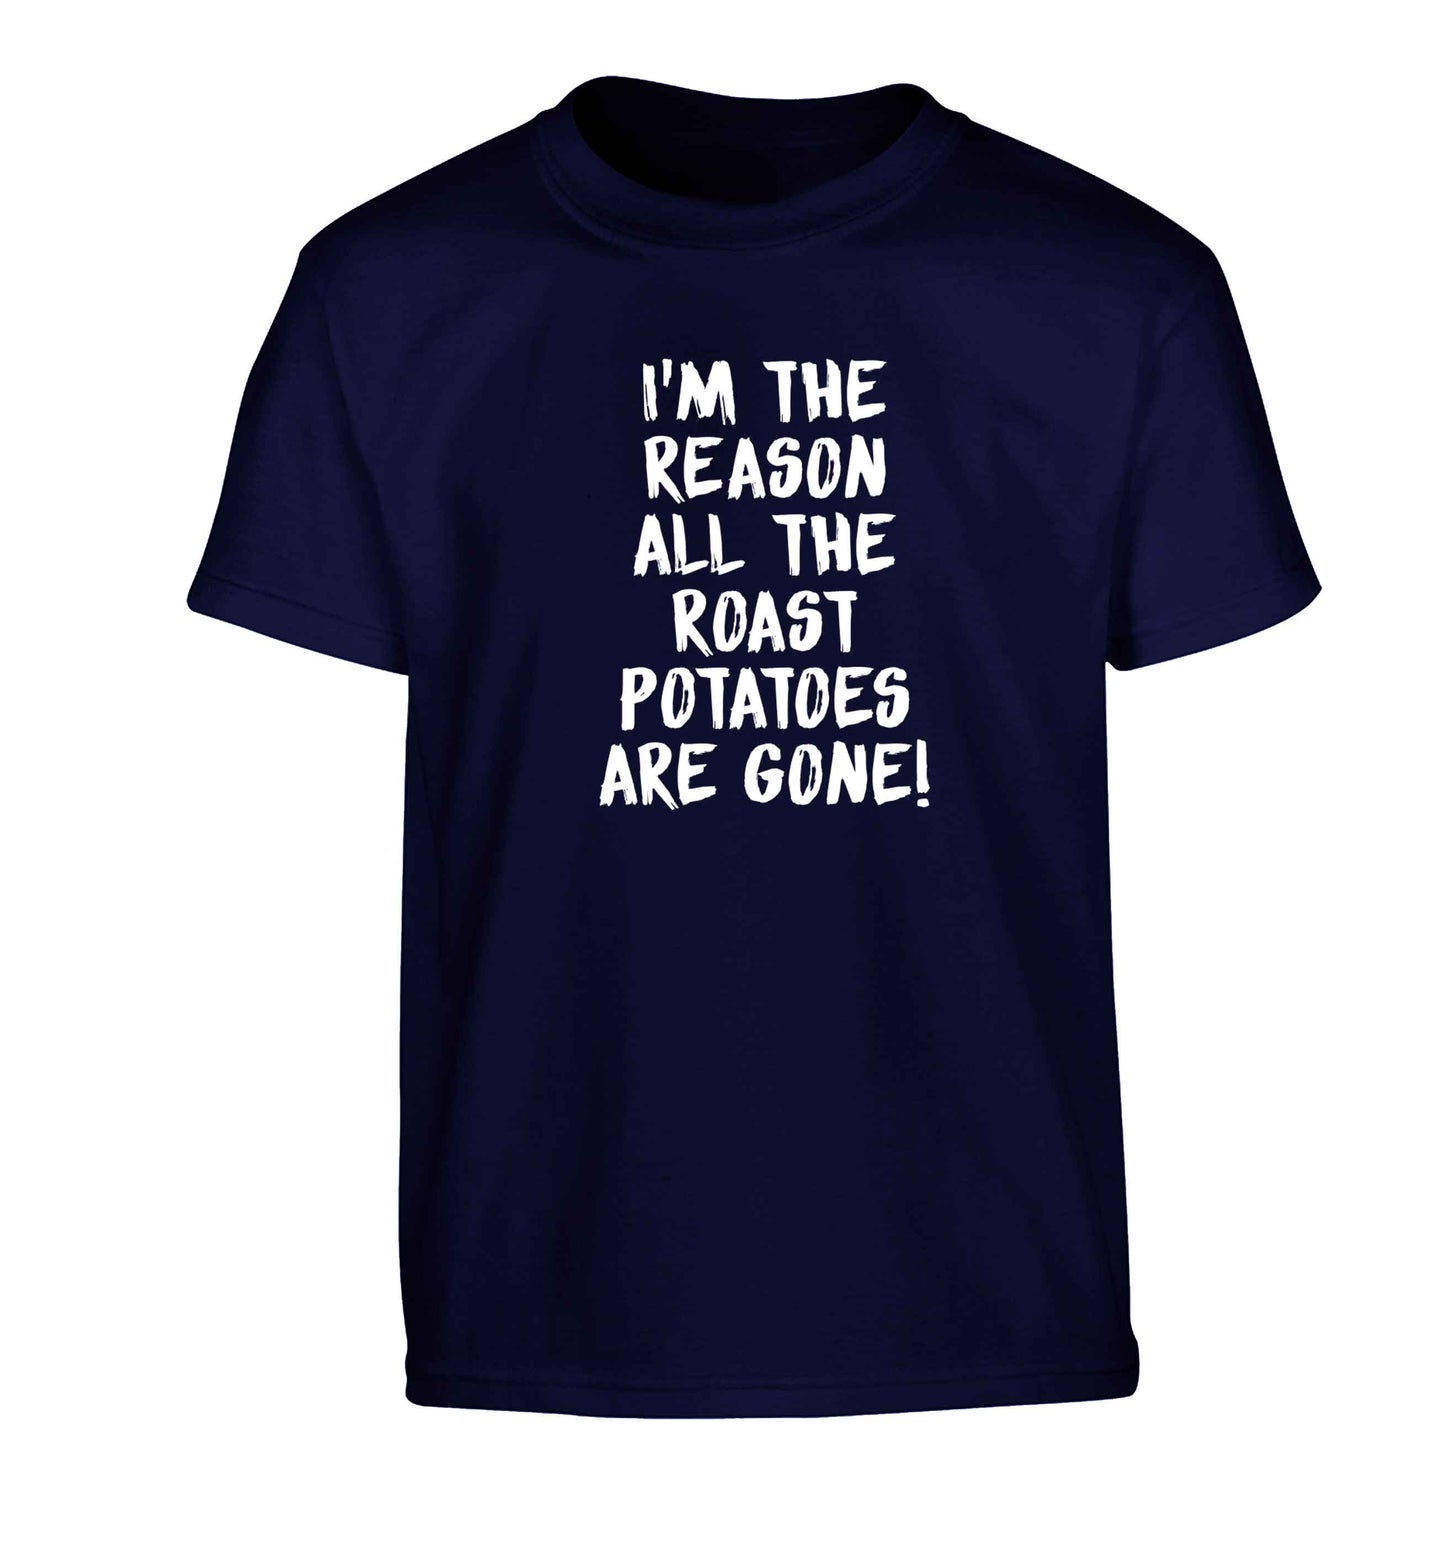 I'm the reason all the roast potatoes are gone Children's navy Tshirt 12-13 Years